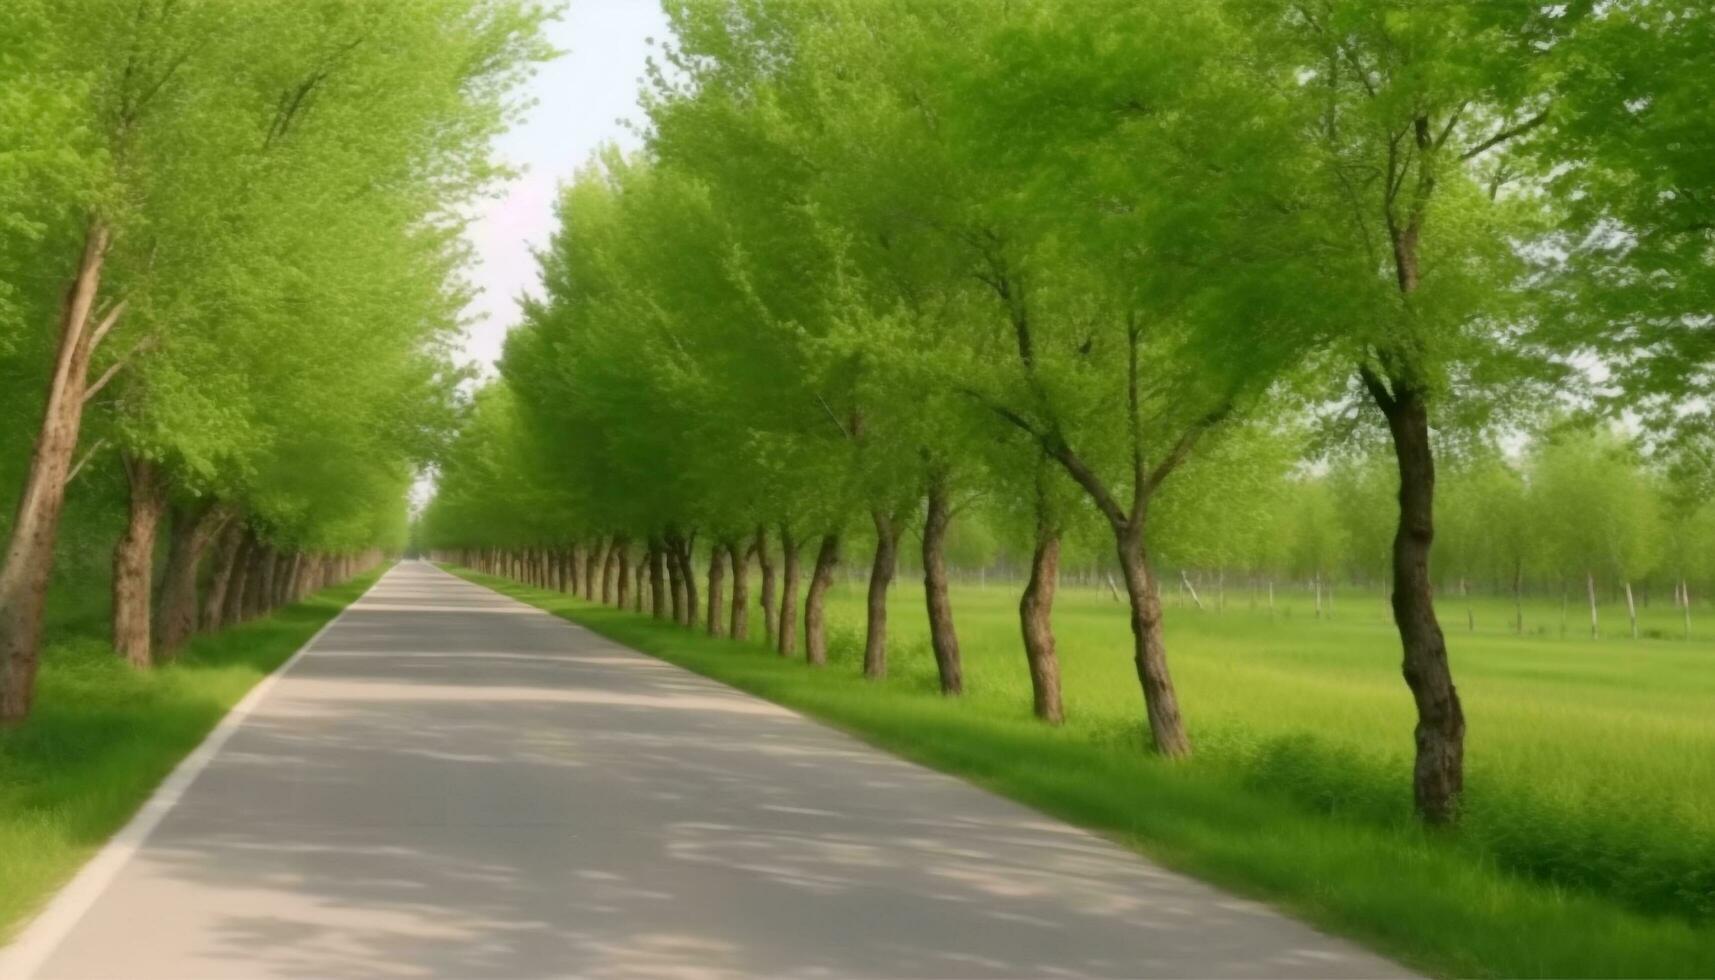 Green grass and trees line the single lane country road generated by AI photo